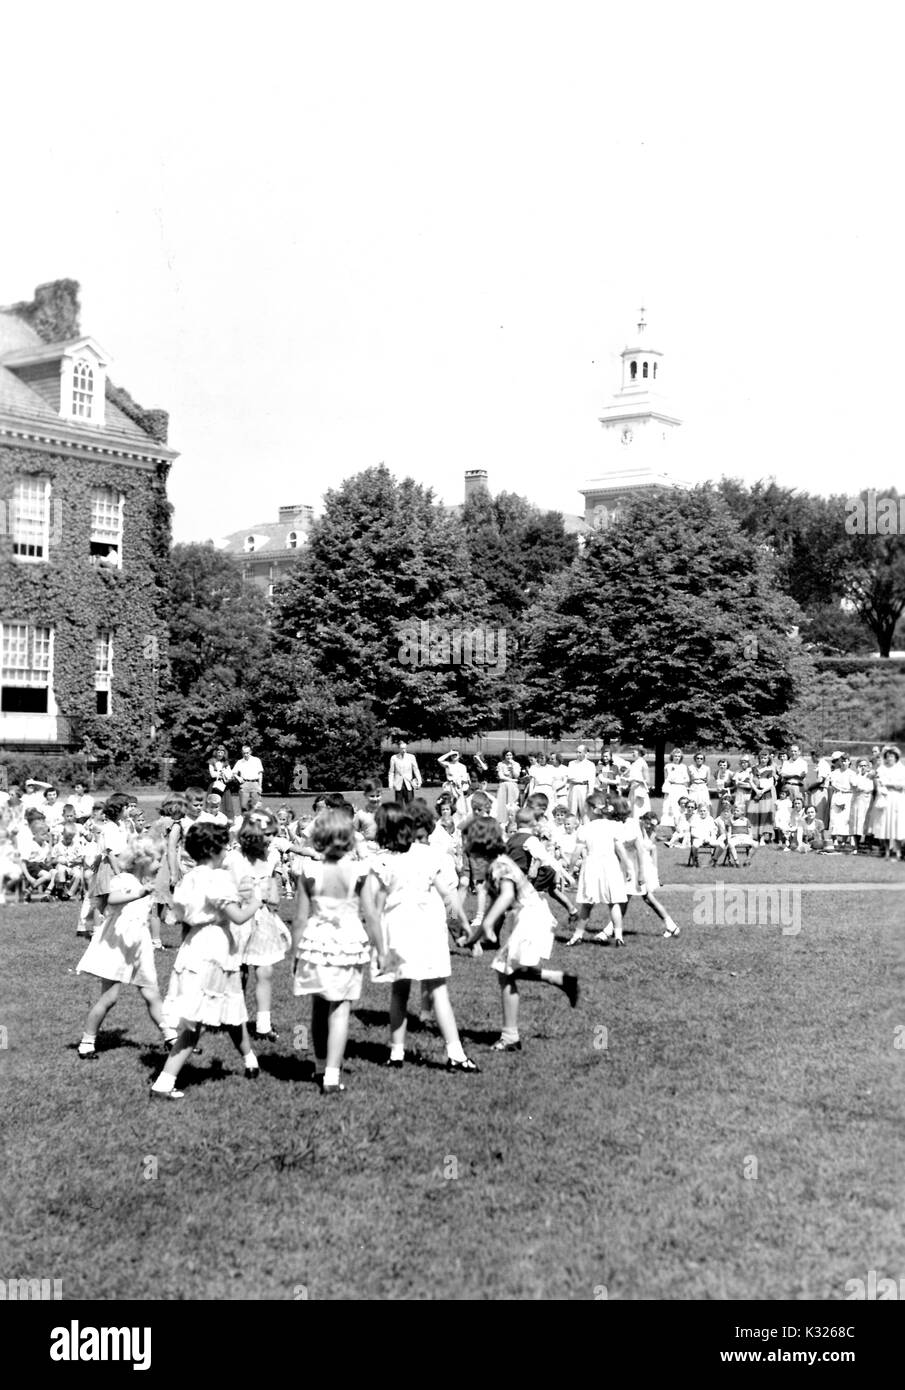 At the end of the school year for a demonstration school at Johns Hopkins University, young boys and girls put on a show in the grass on a sunny day, happily skipping dancing in front of an audience made up of classmates, teachers, and parents sitting and standing outside of an ivy-covered campus building, with Gilman Hall, a humanities building on campus, peeking through the trees in the distance, Baltimore, Maryland, July, 1950. Stock Photo